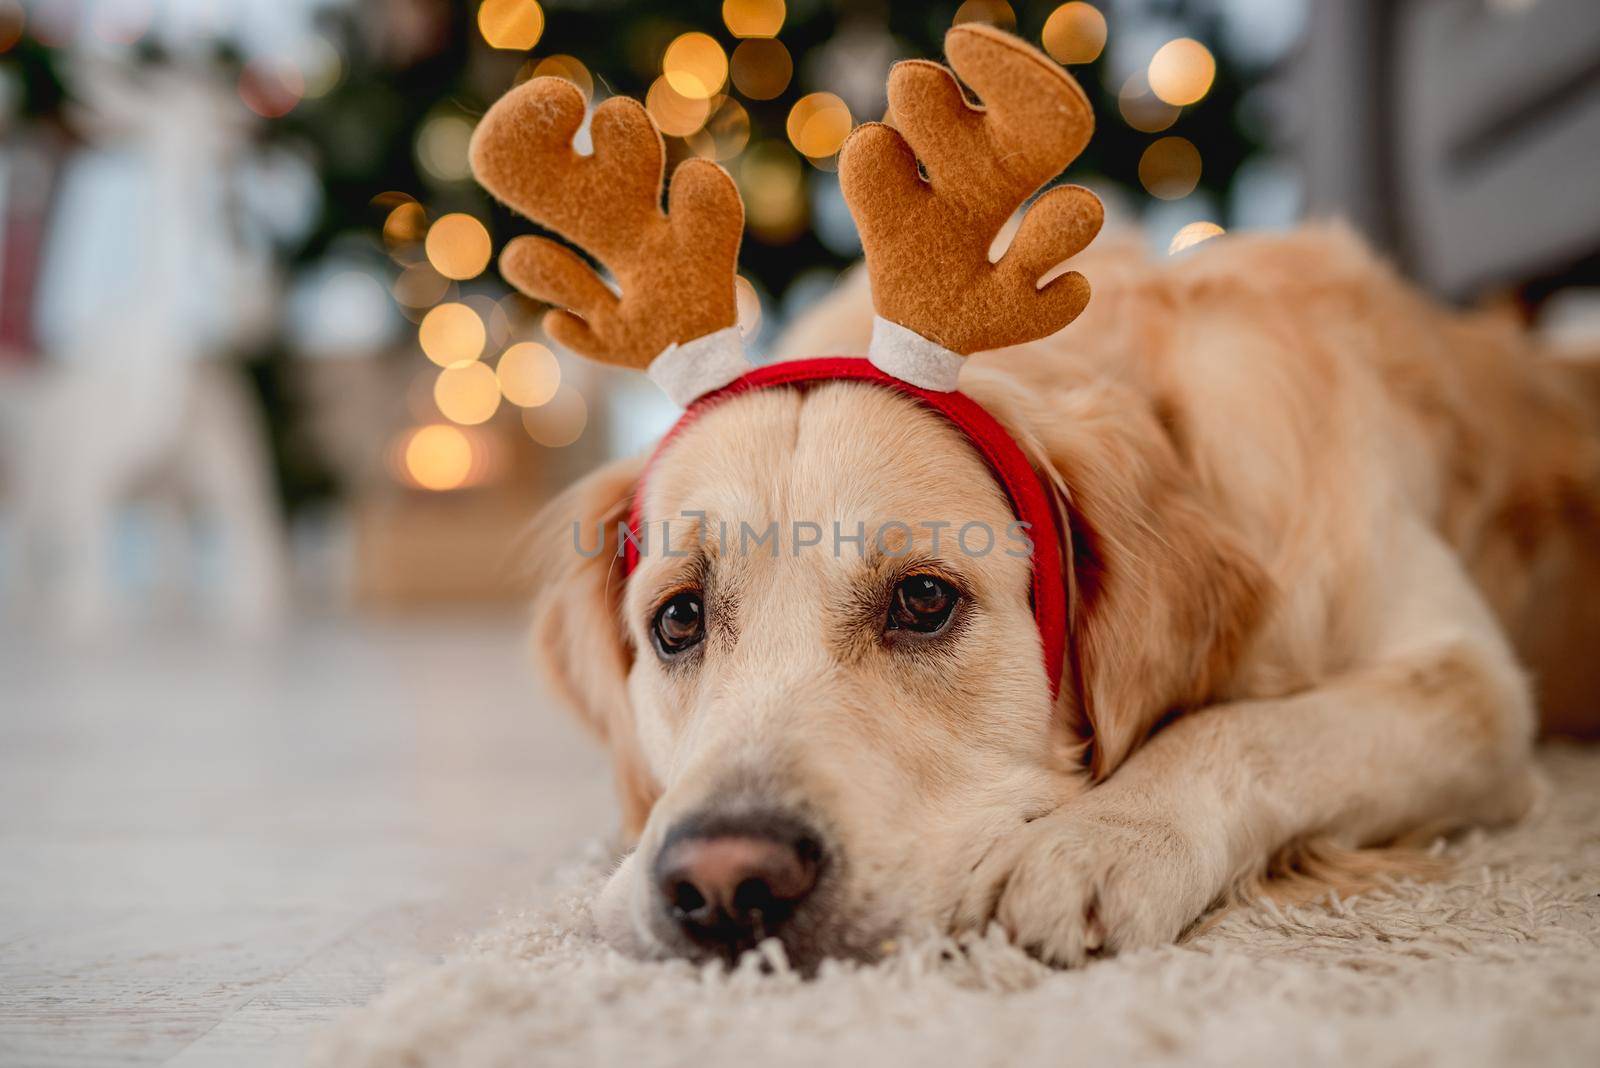 Golden retriever dog wearing festive costume lying on carpet in Christmas time in decorated room